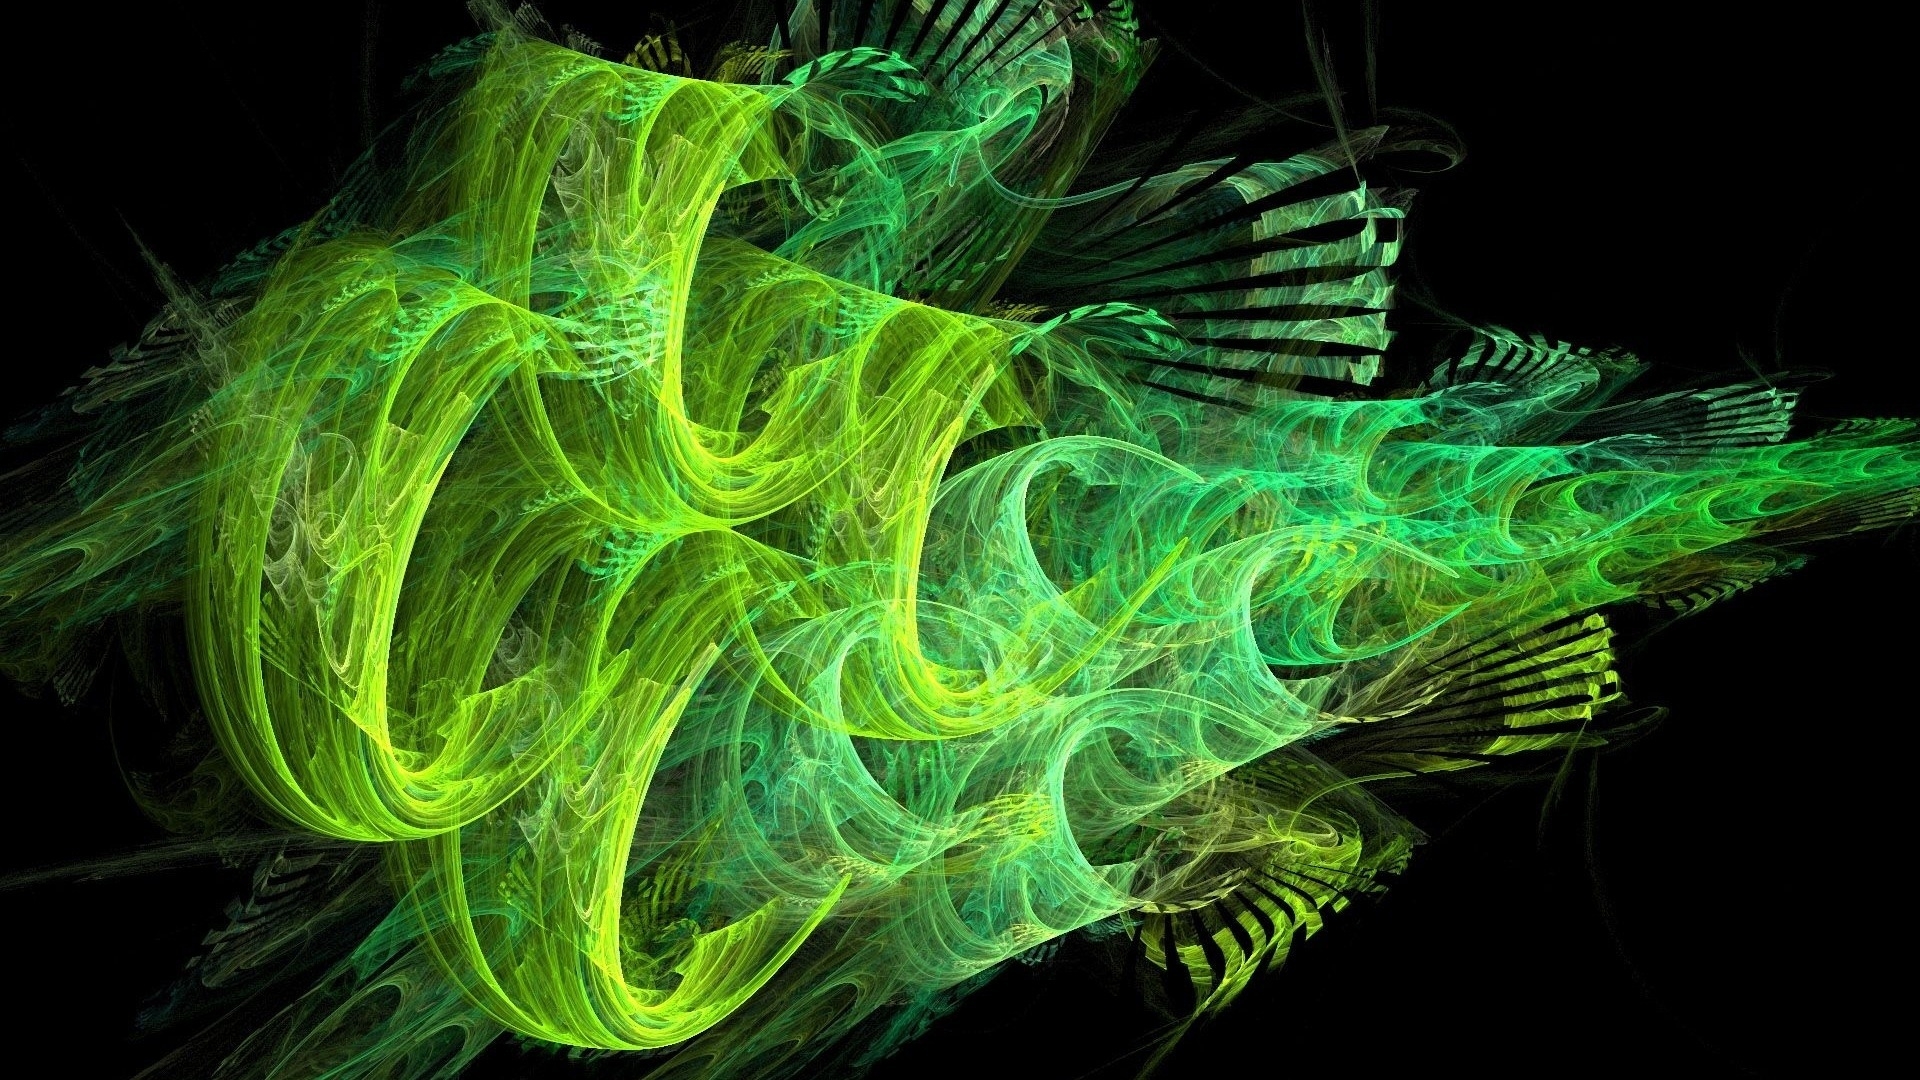 Abstract Fractal for 1920 x 1080 HDTV 1080p resolution